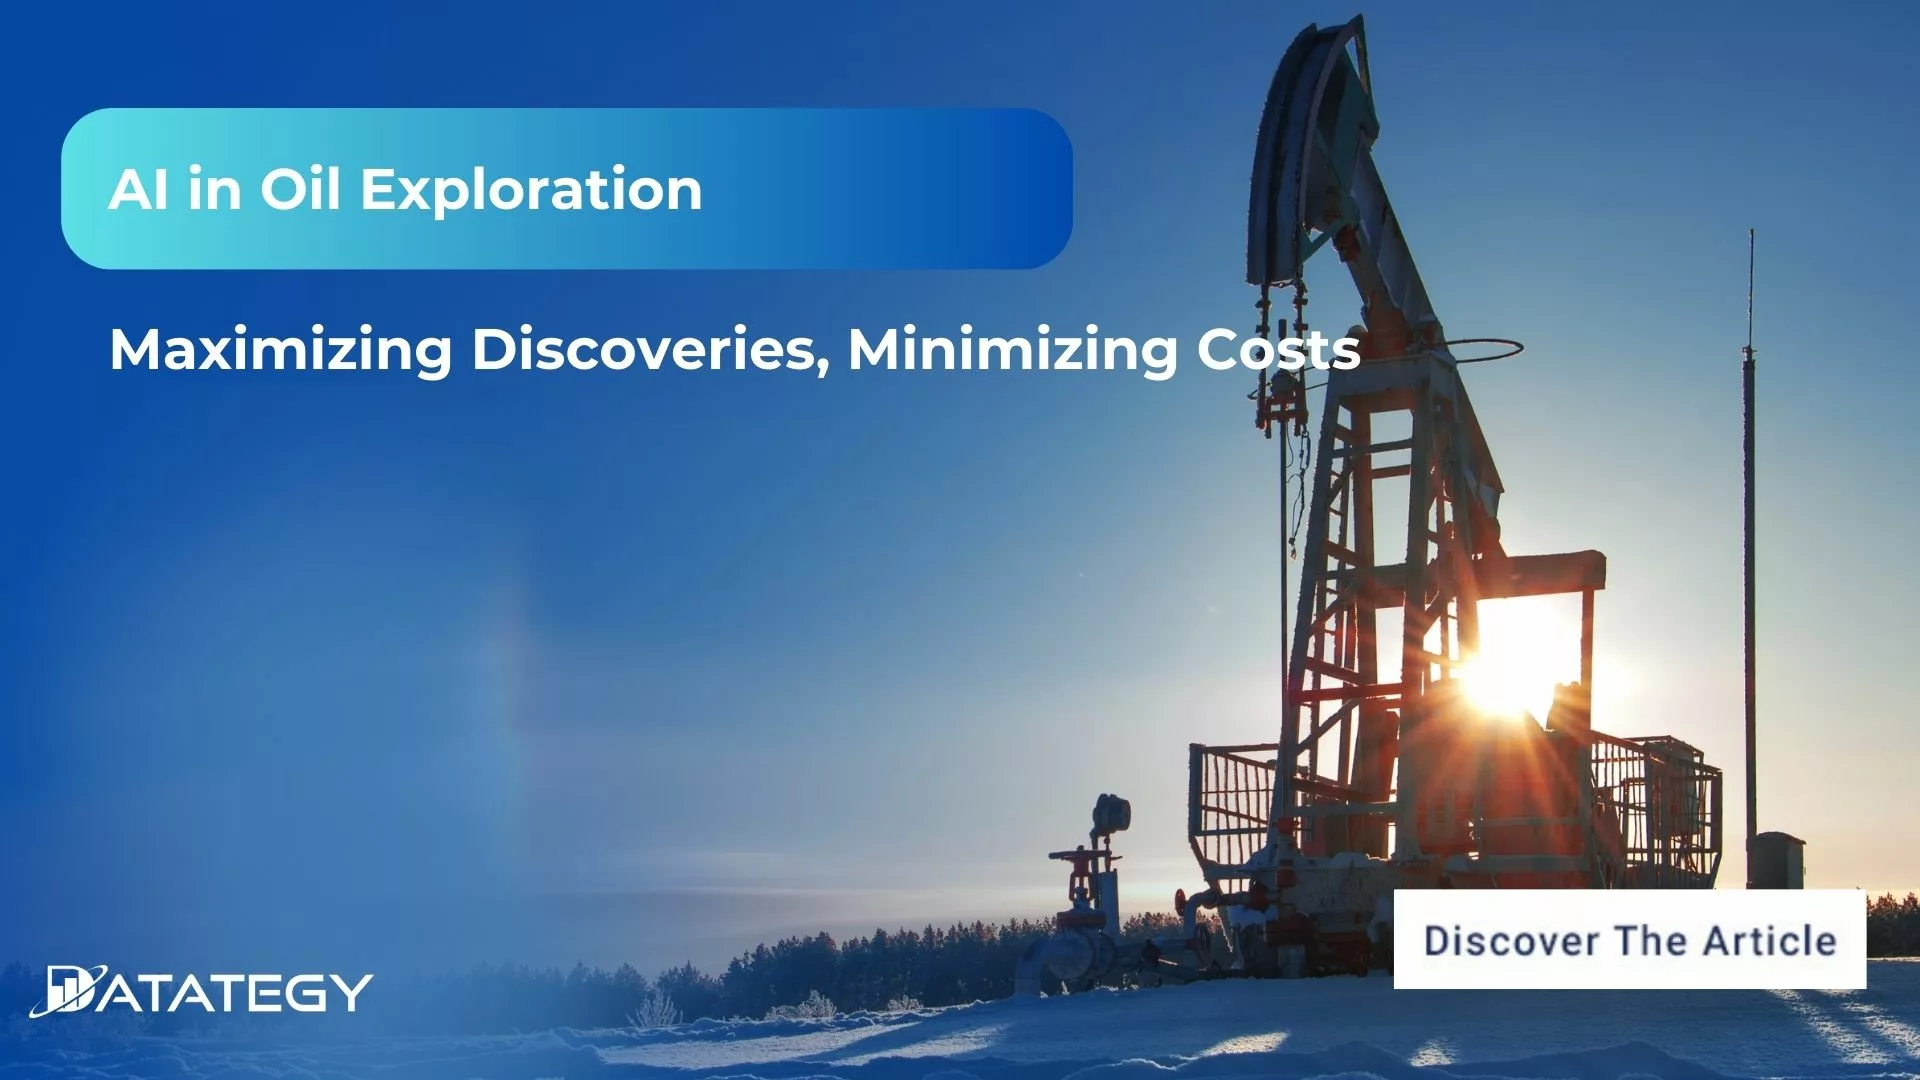 AI in Oil Exploration: Maximizing Discoveries, Minimizing Costs